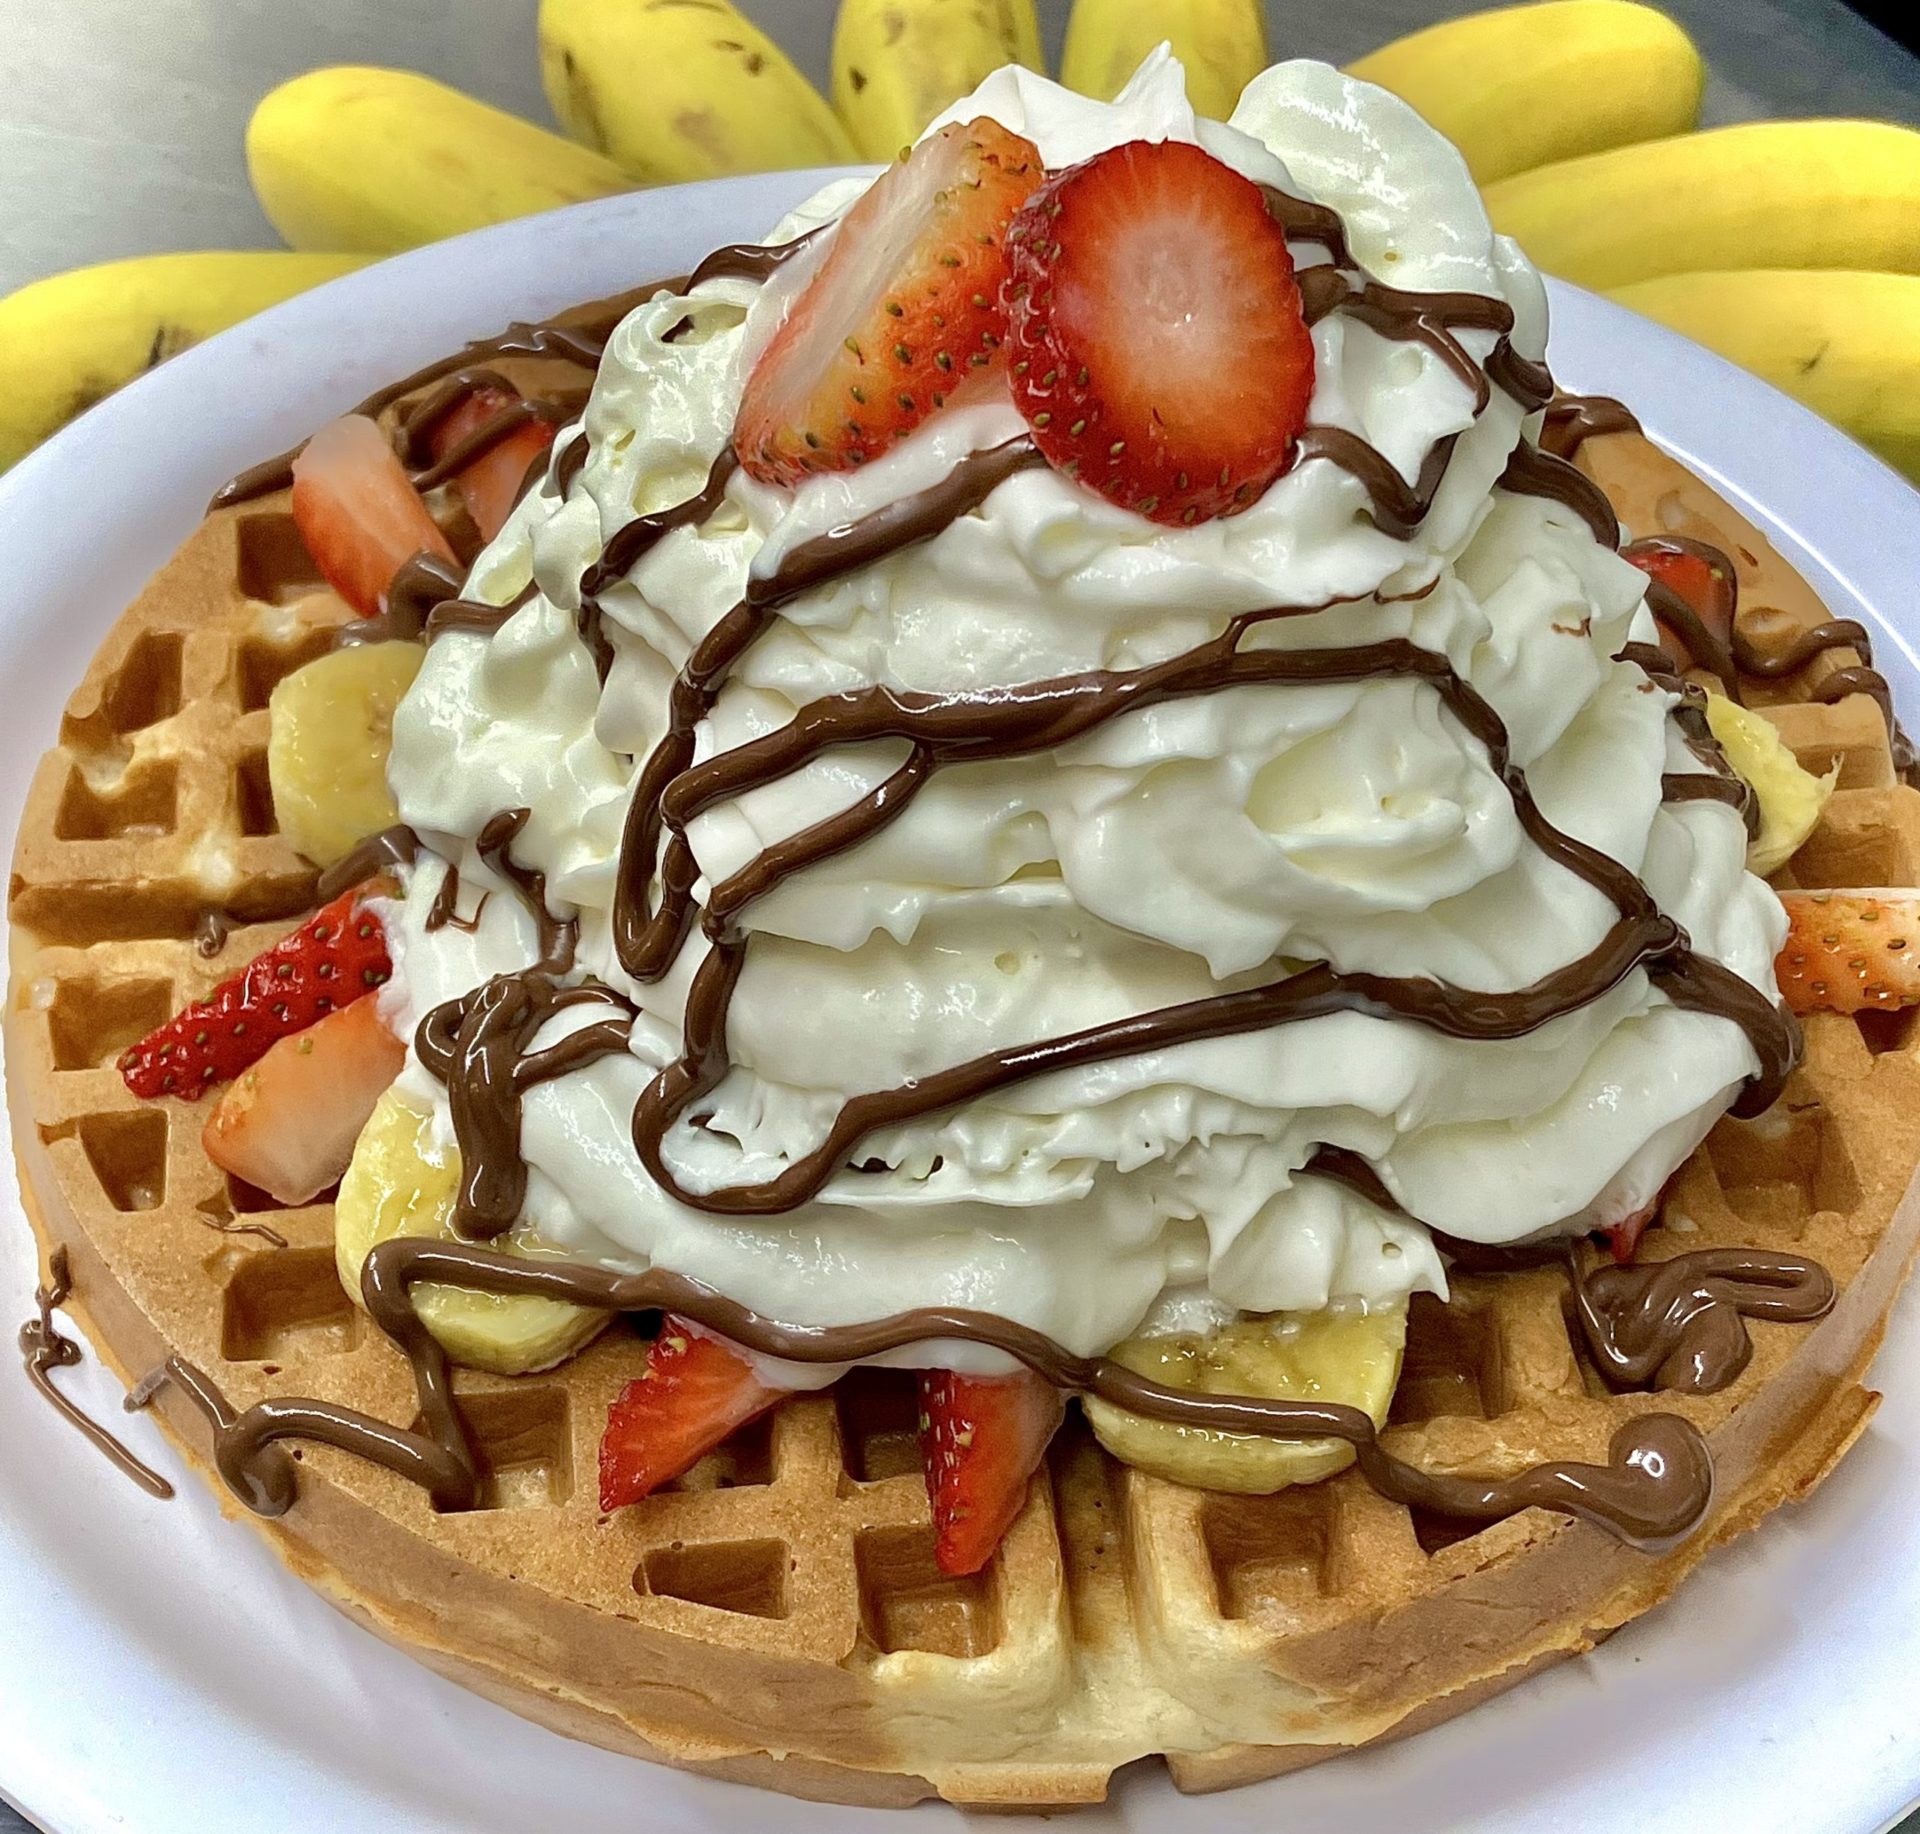 A large waffle topped with sliced bananas and strawberries, a big dollop of whipped cream, and chocolate drizzle.